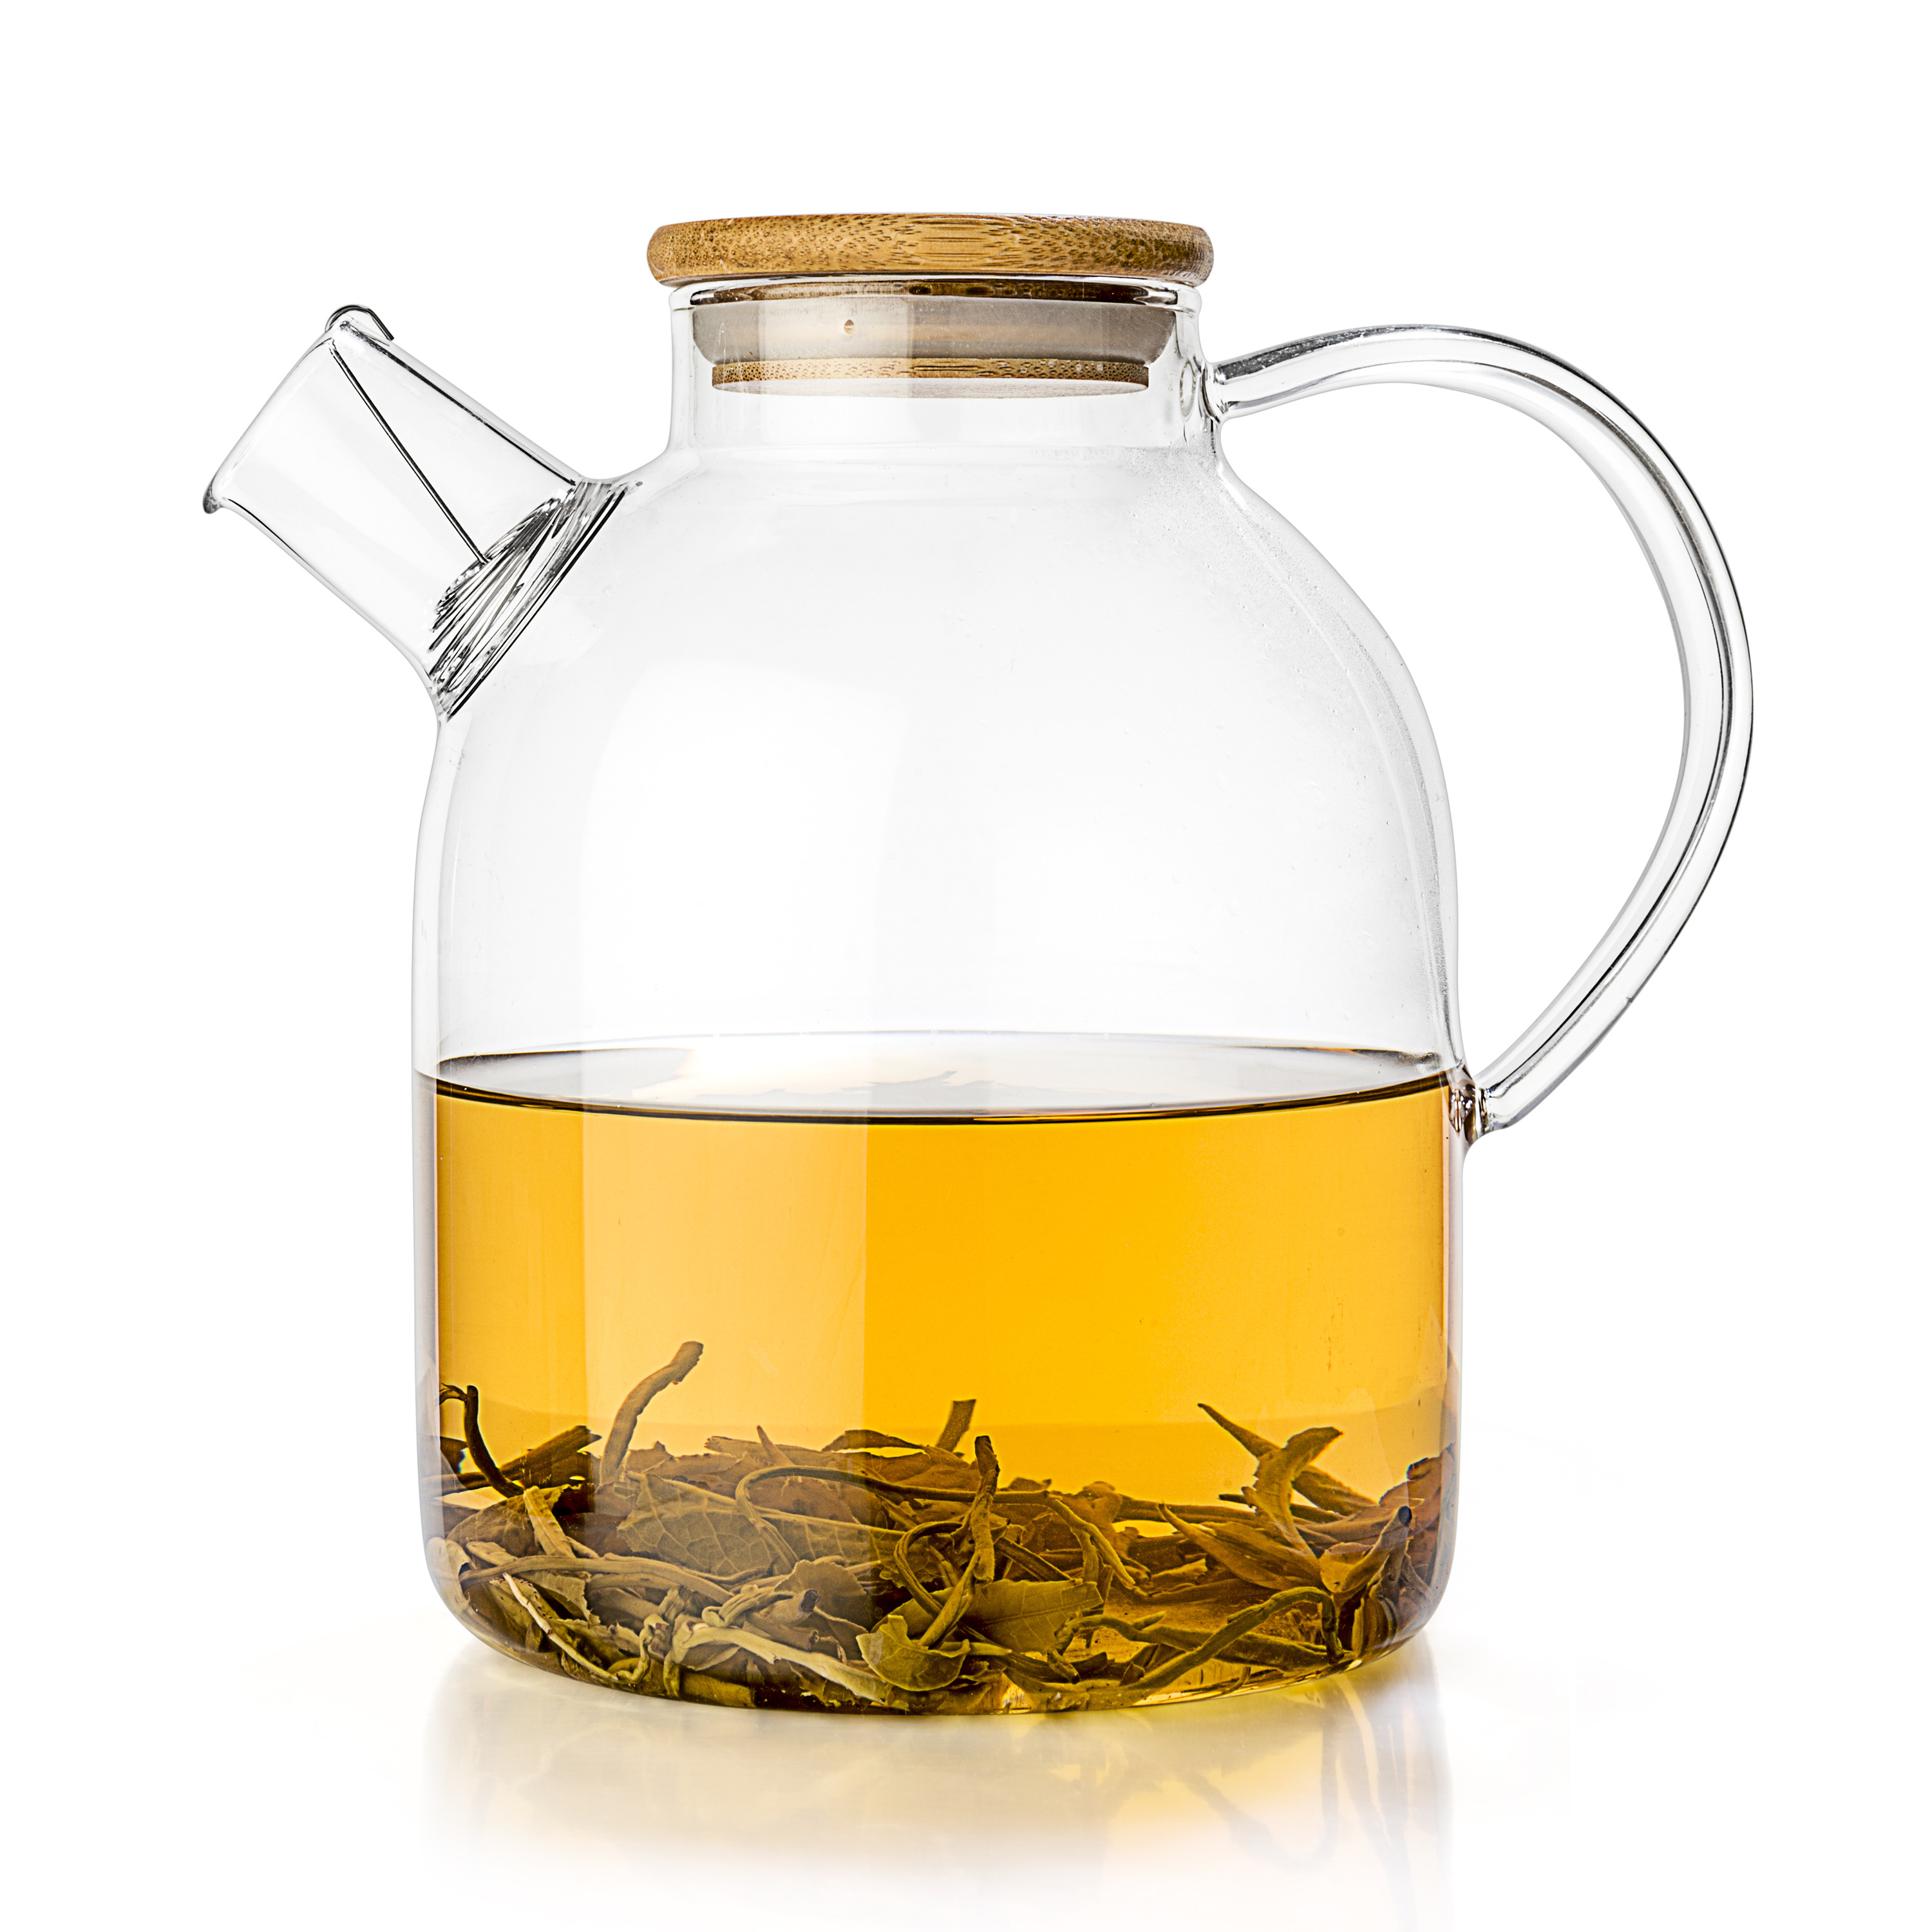 Buy Wholesale China Heat Resistant Glass Teapot, Microwave And